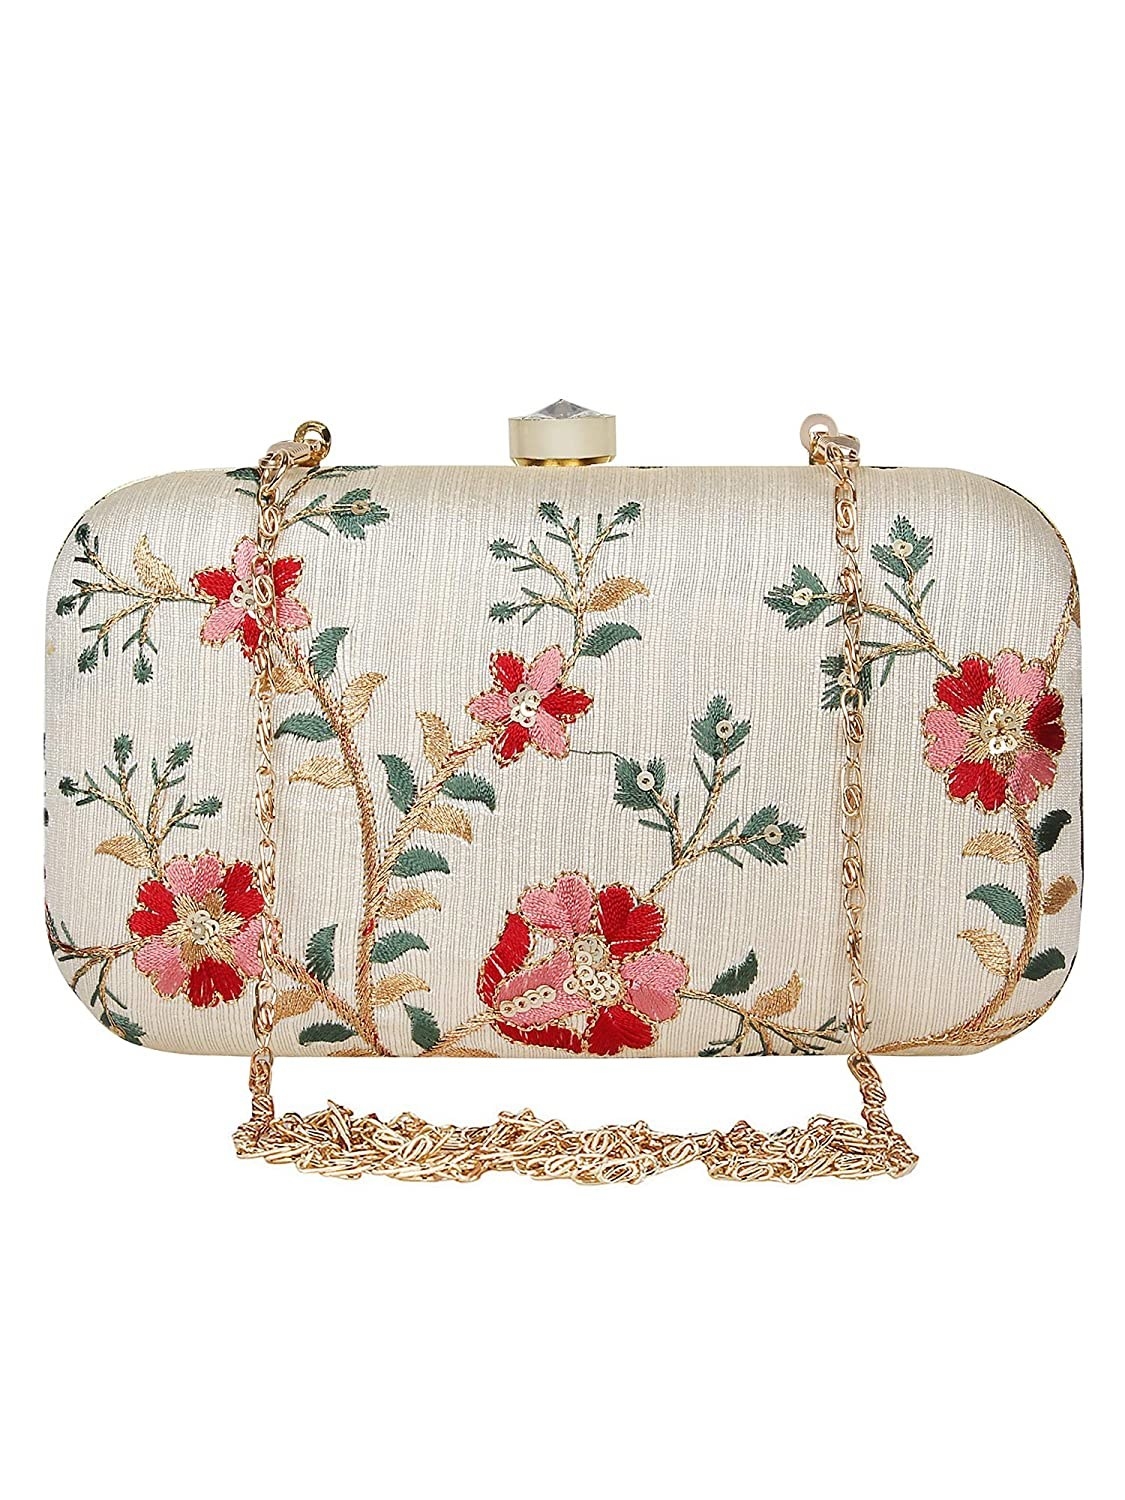 A white clutch with floral patterns on it